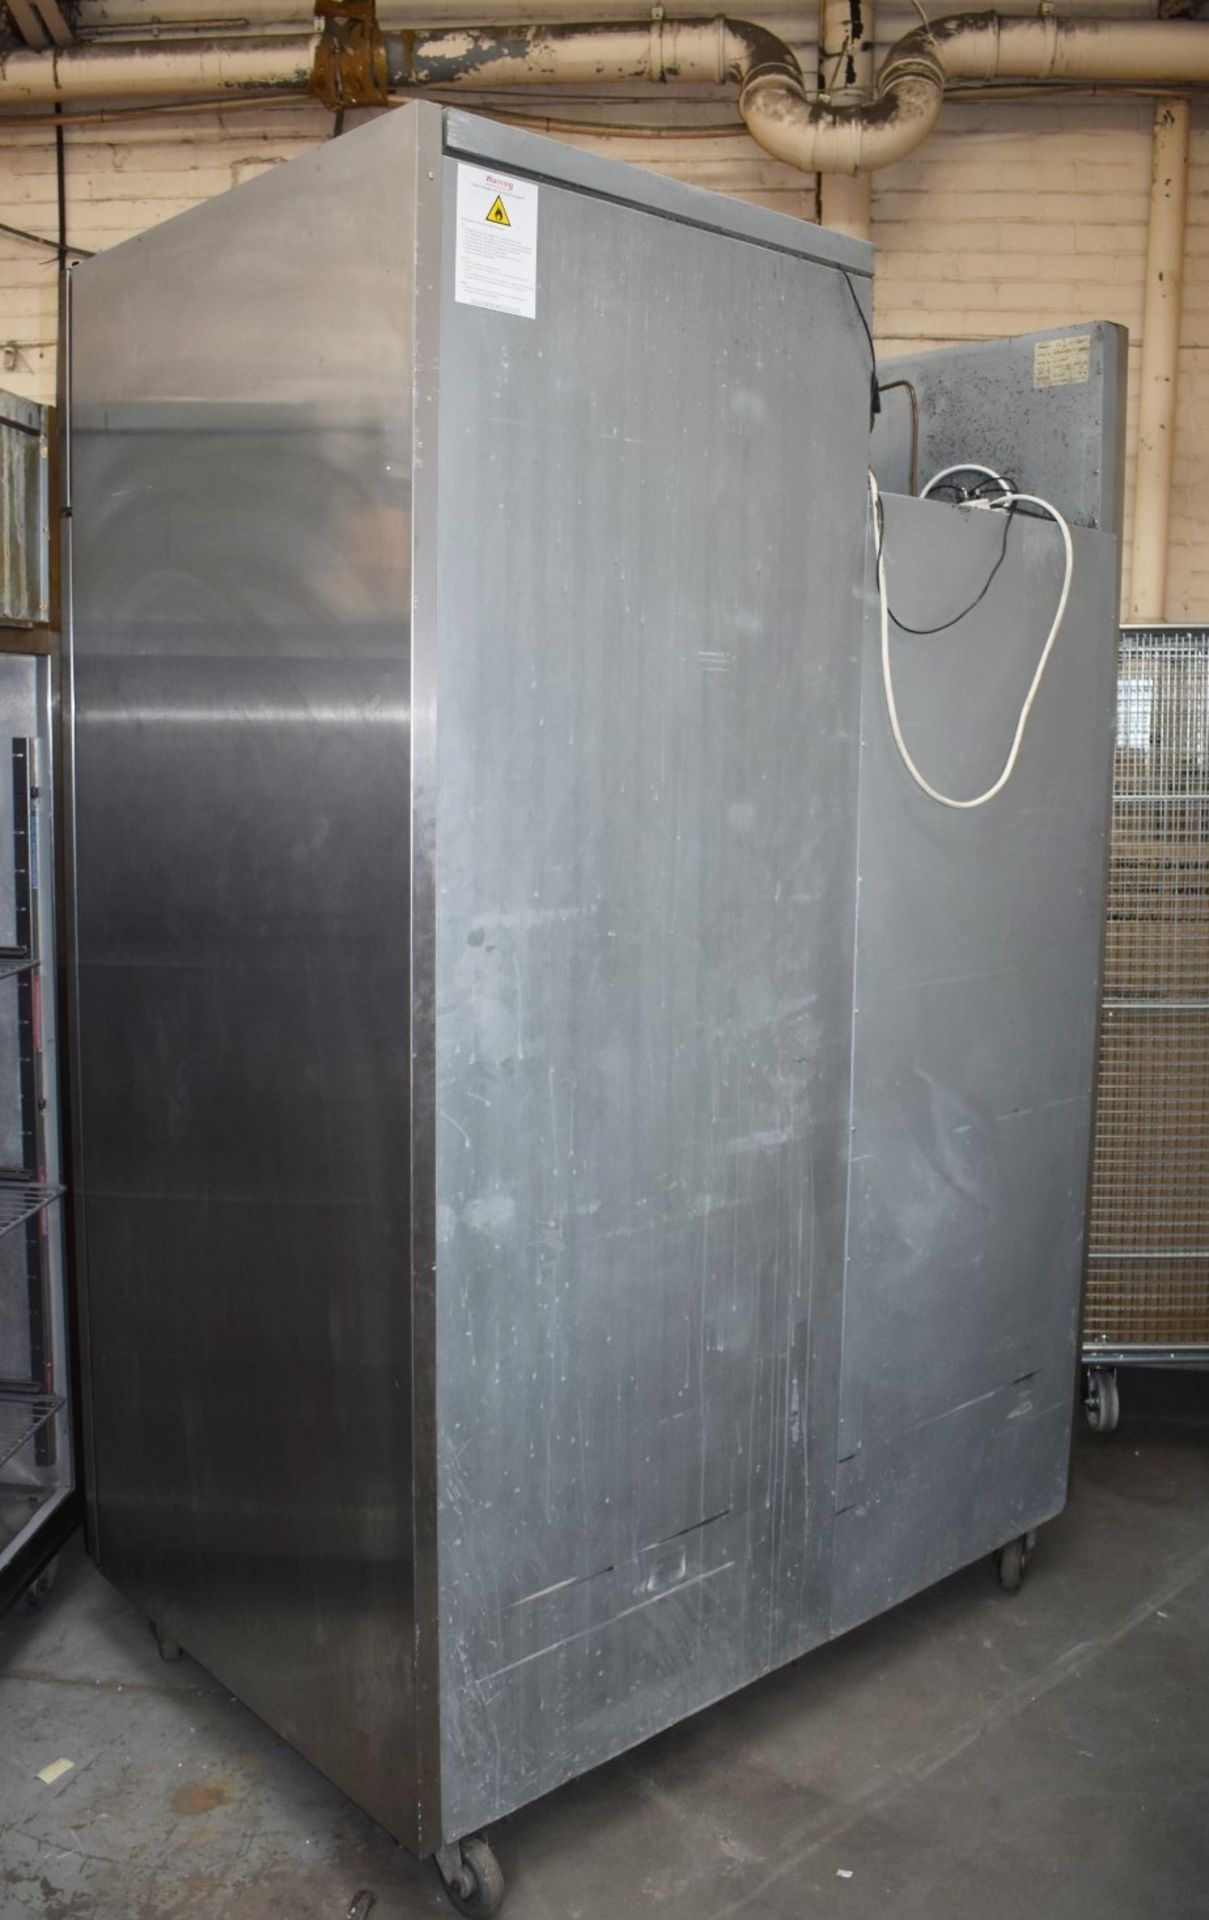 1 x Williams HC2T Double Door Refrigerator With Stainless Steel Exterior & Internal Pull Out Baskets - Image 7 of 7